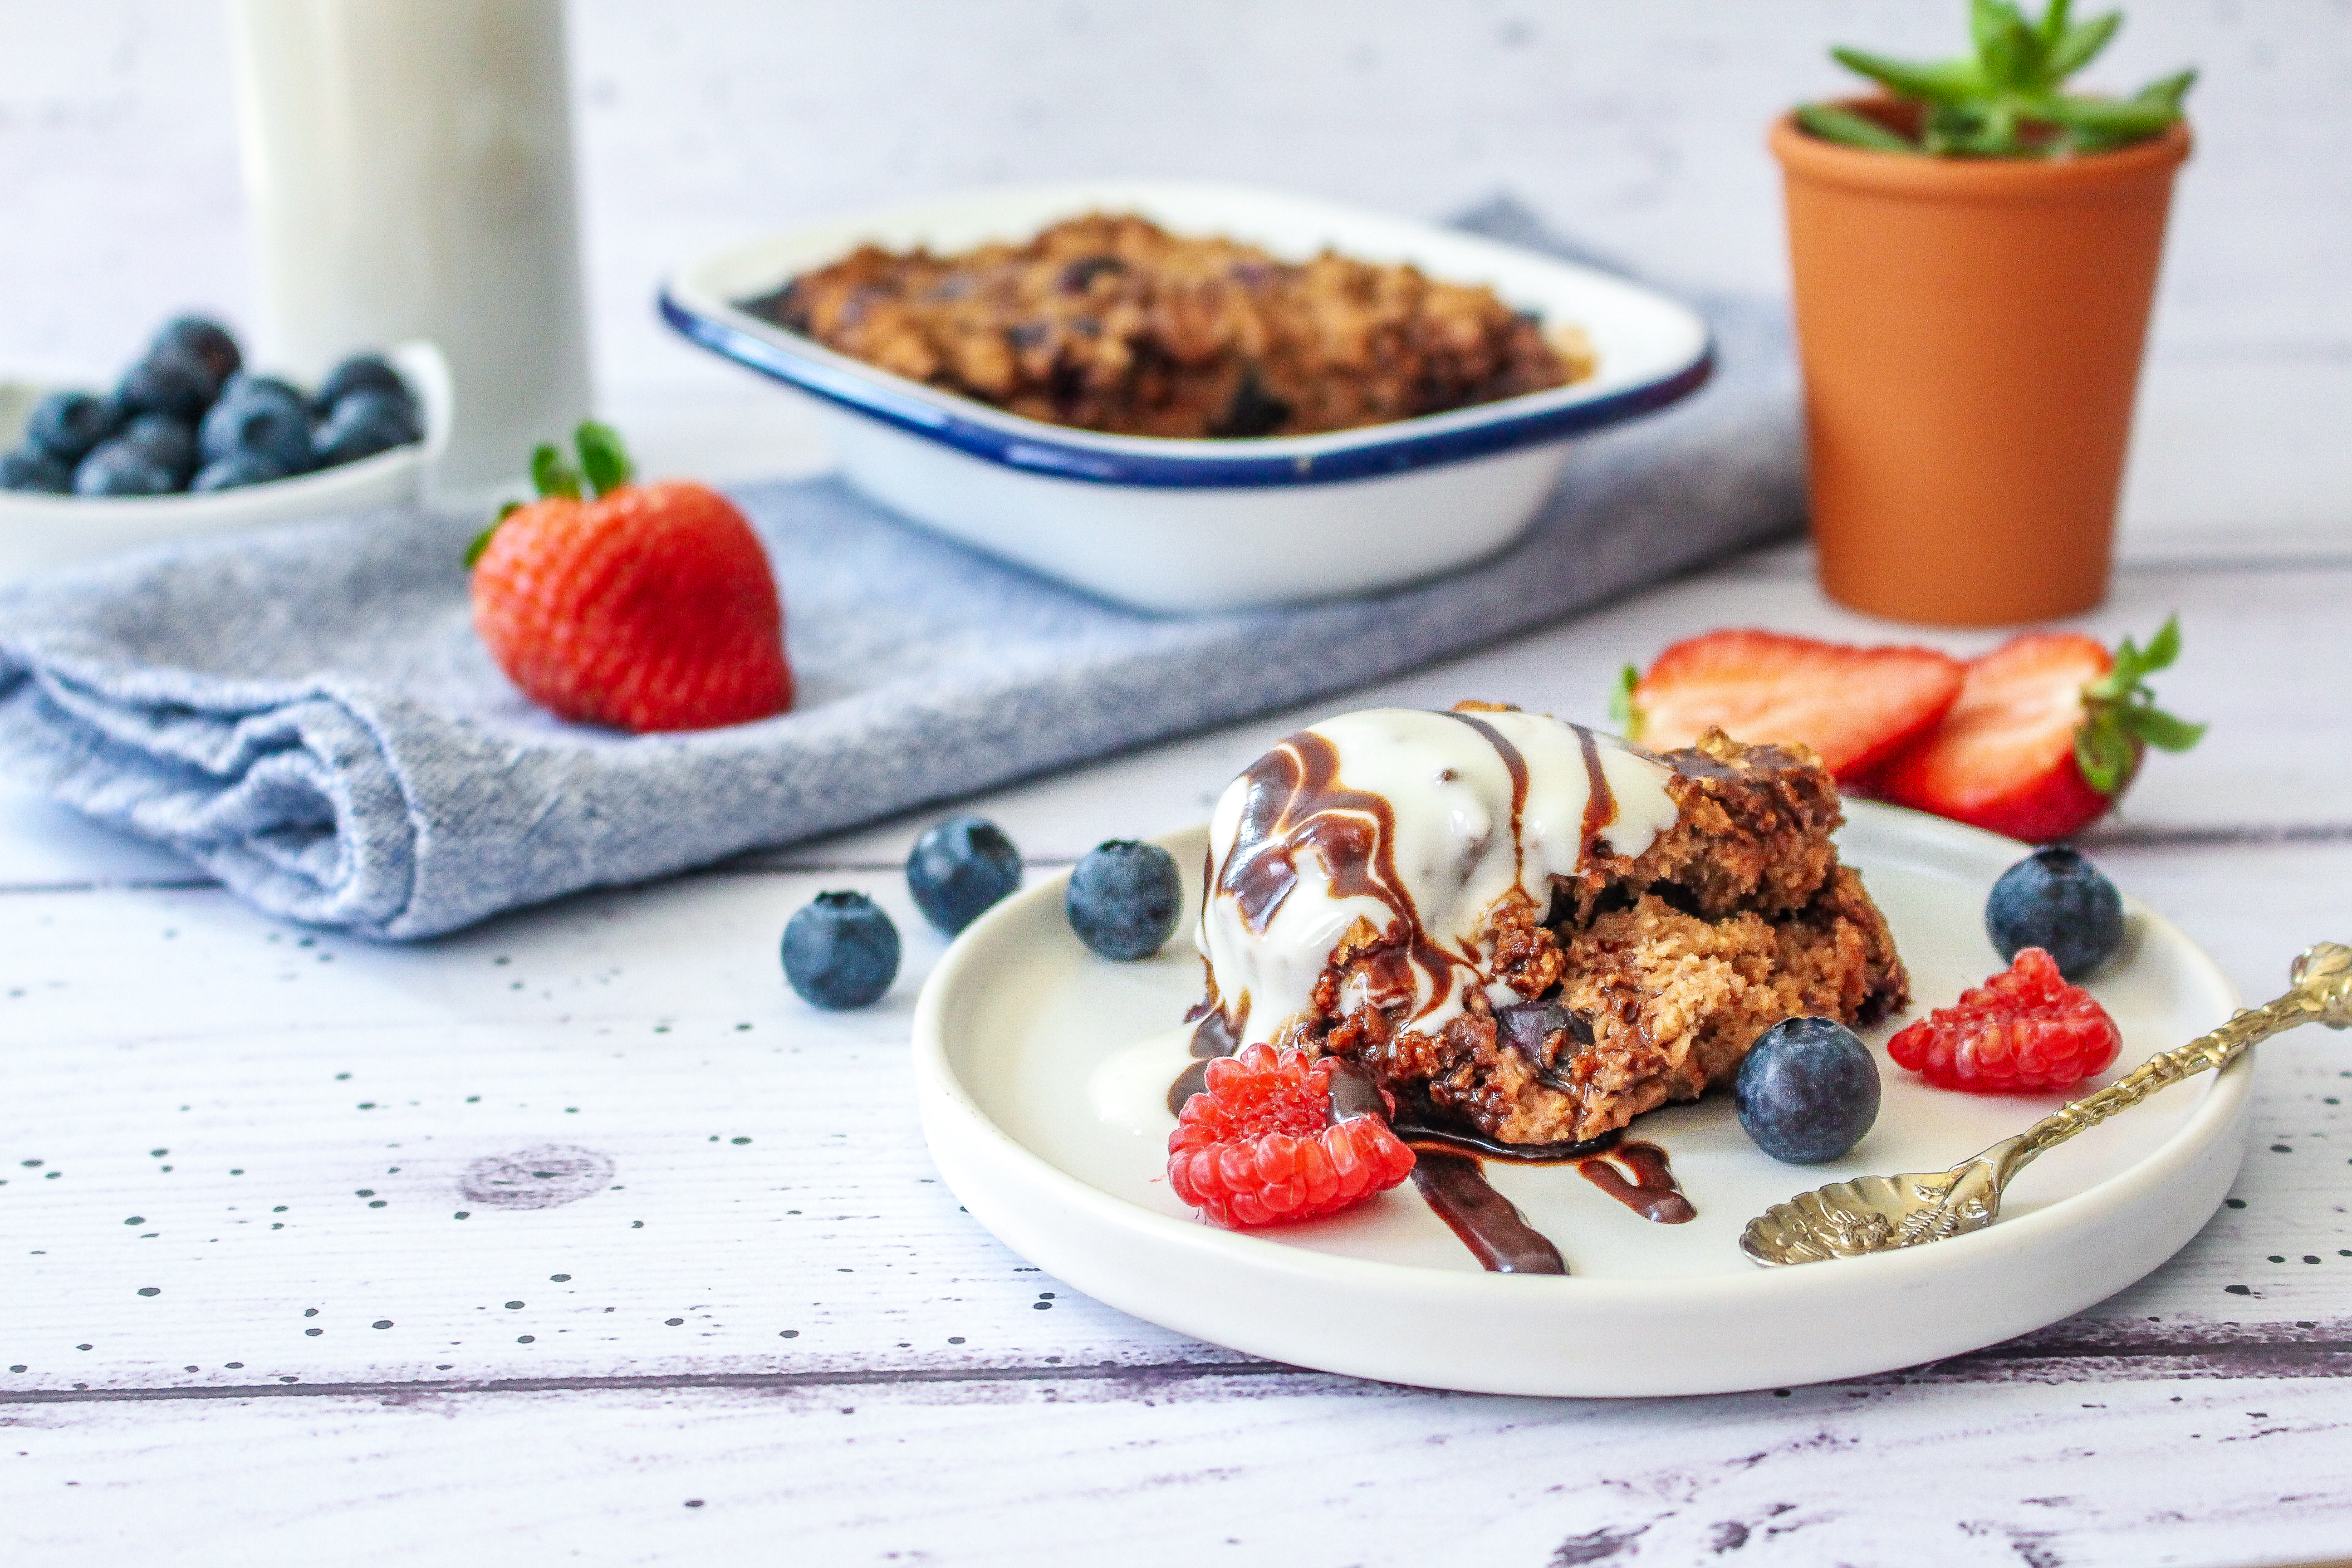 Chocolate Blueberry Baked Oats